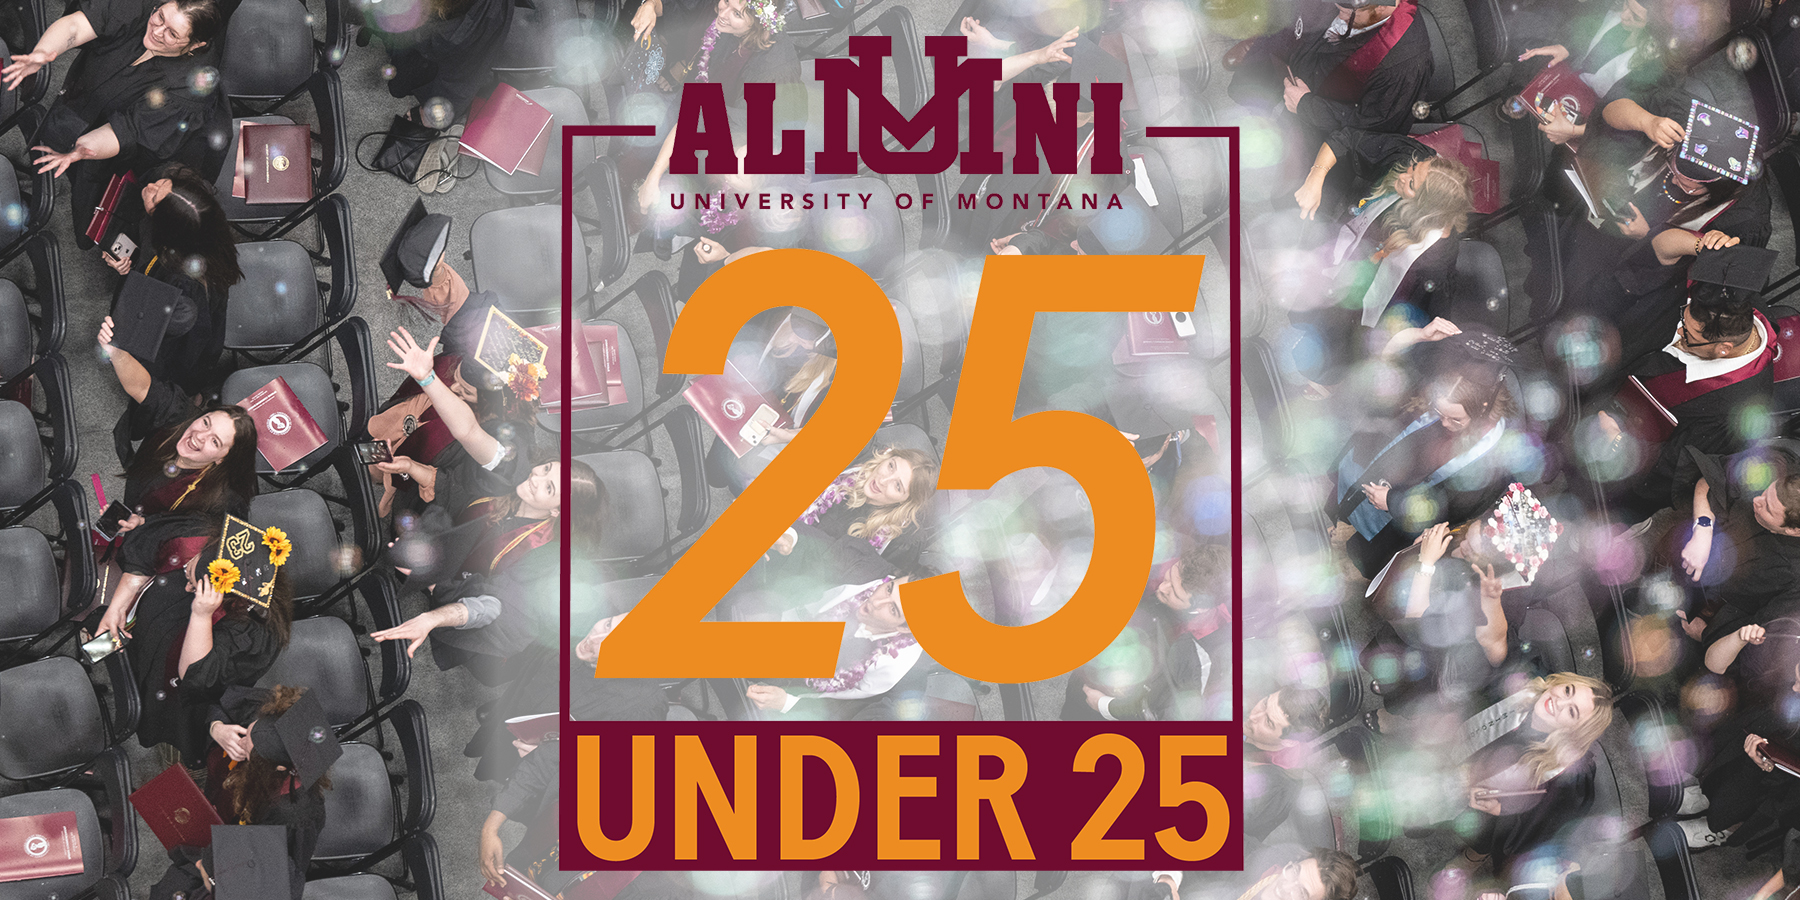 Image of new graduates with a 25 Under 25 logo overlay